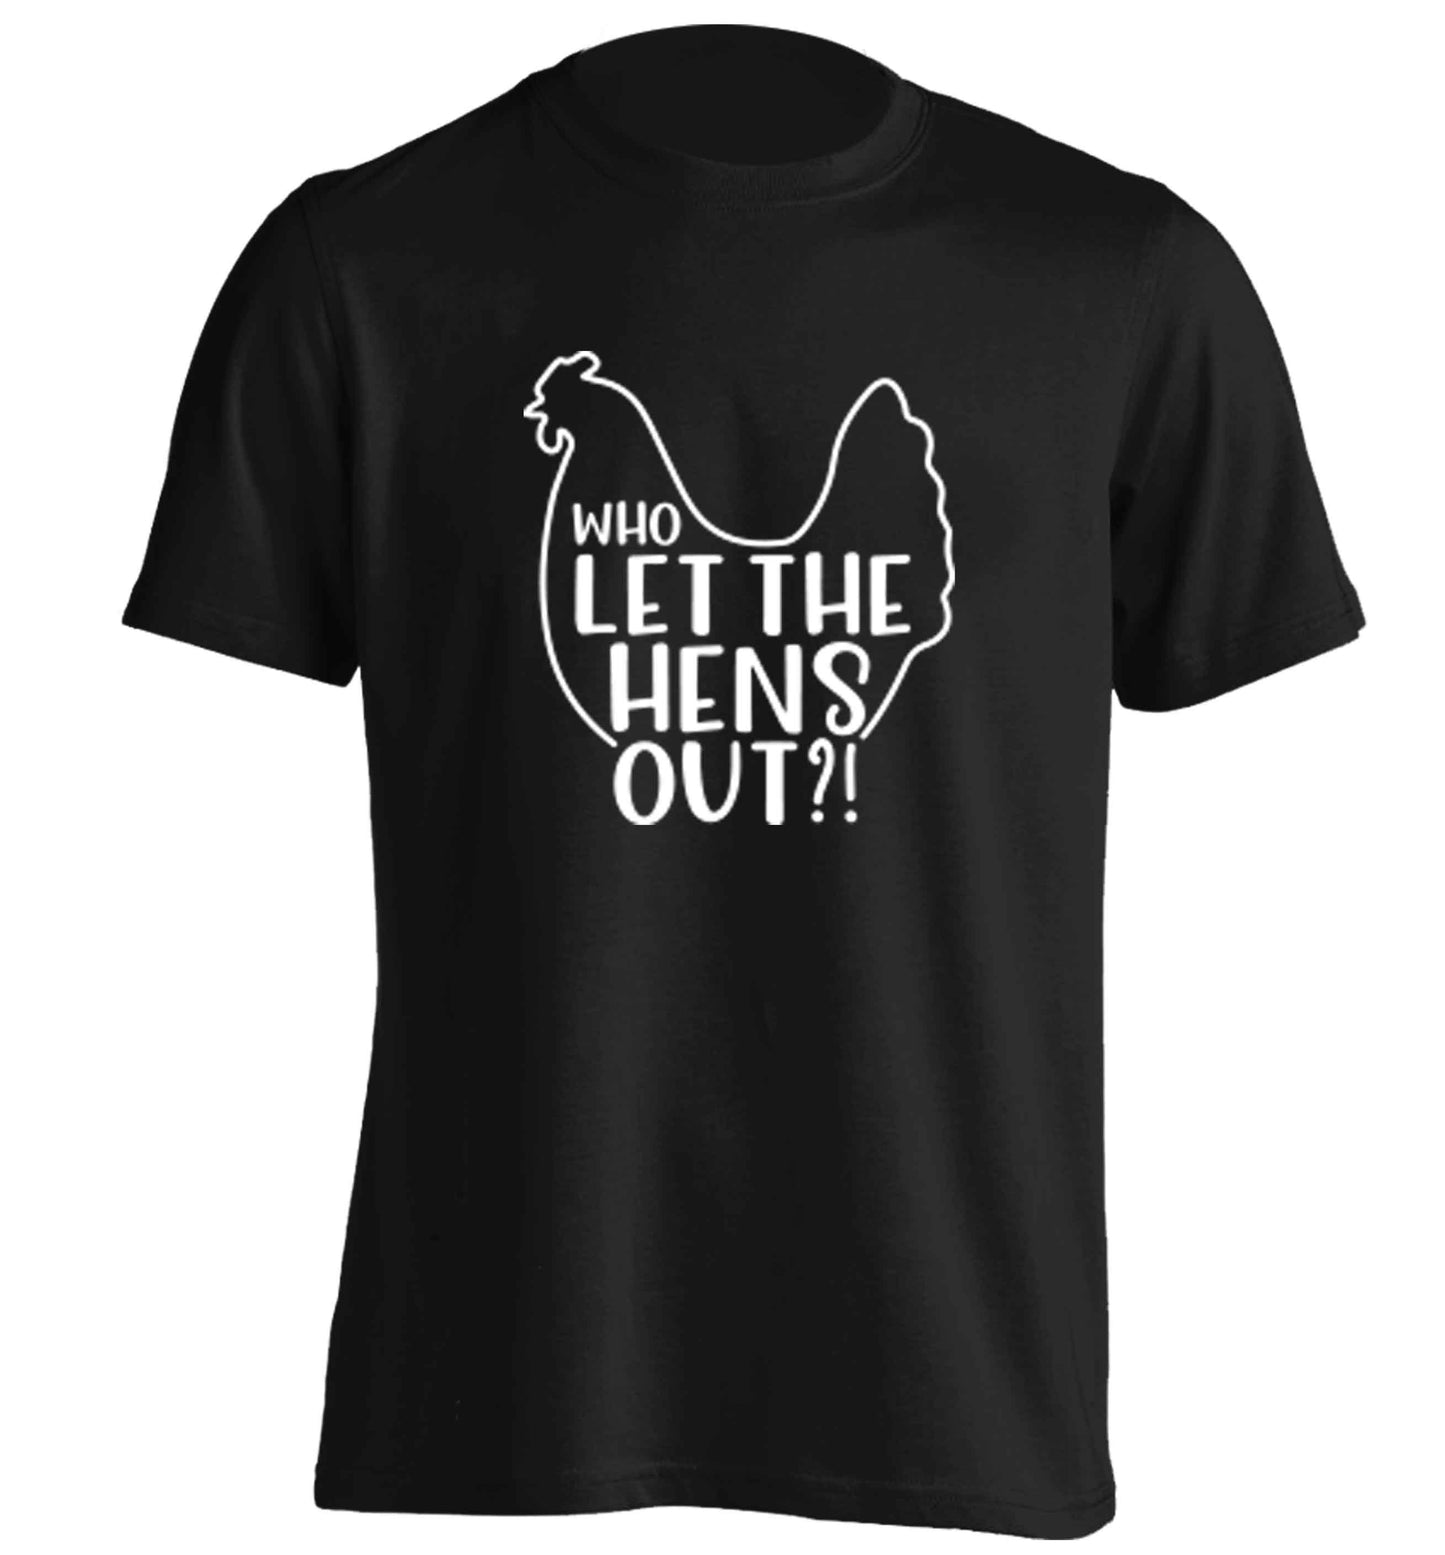 Who let the hens out adults unisex black Tshirt 2XL